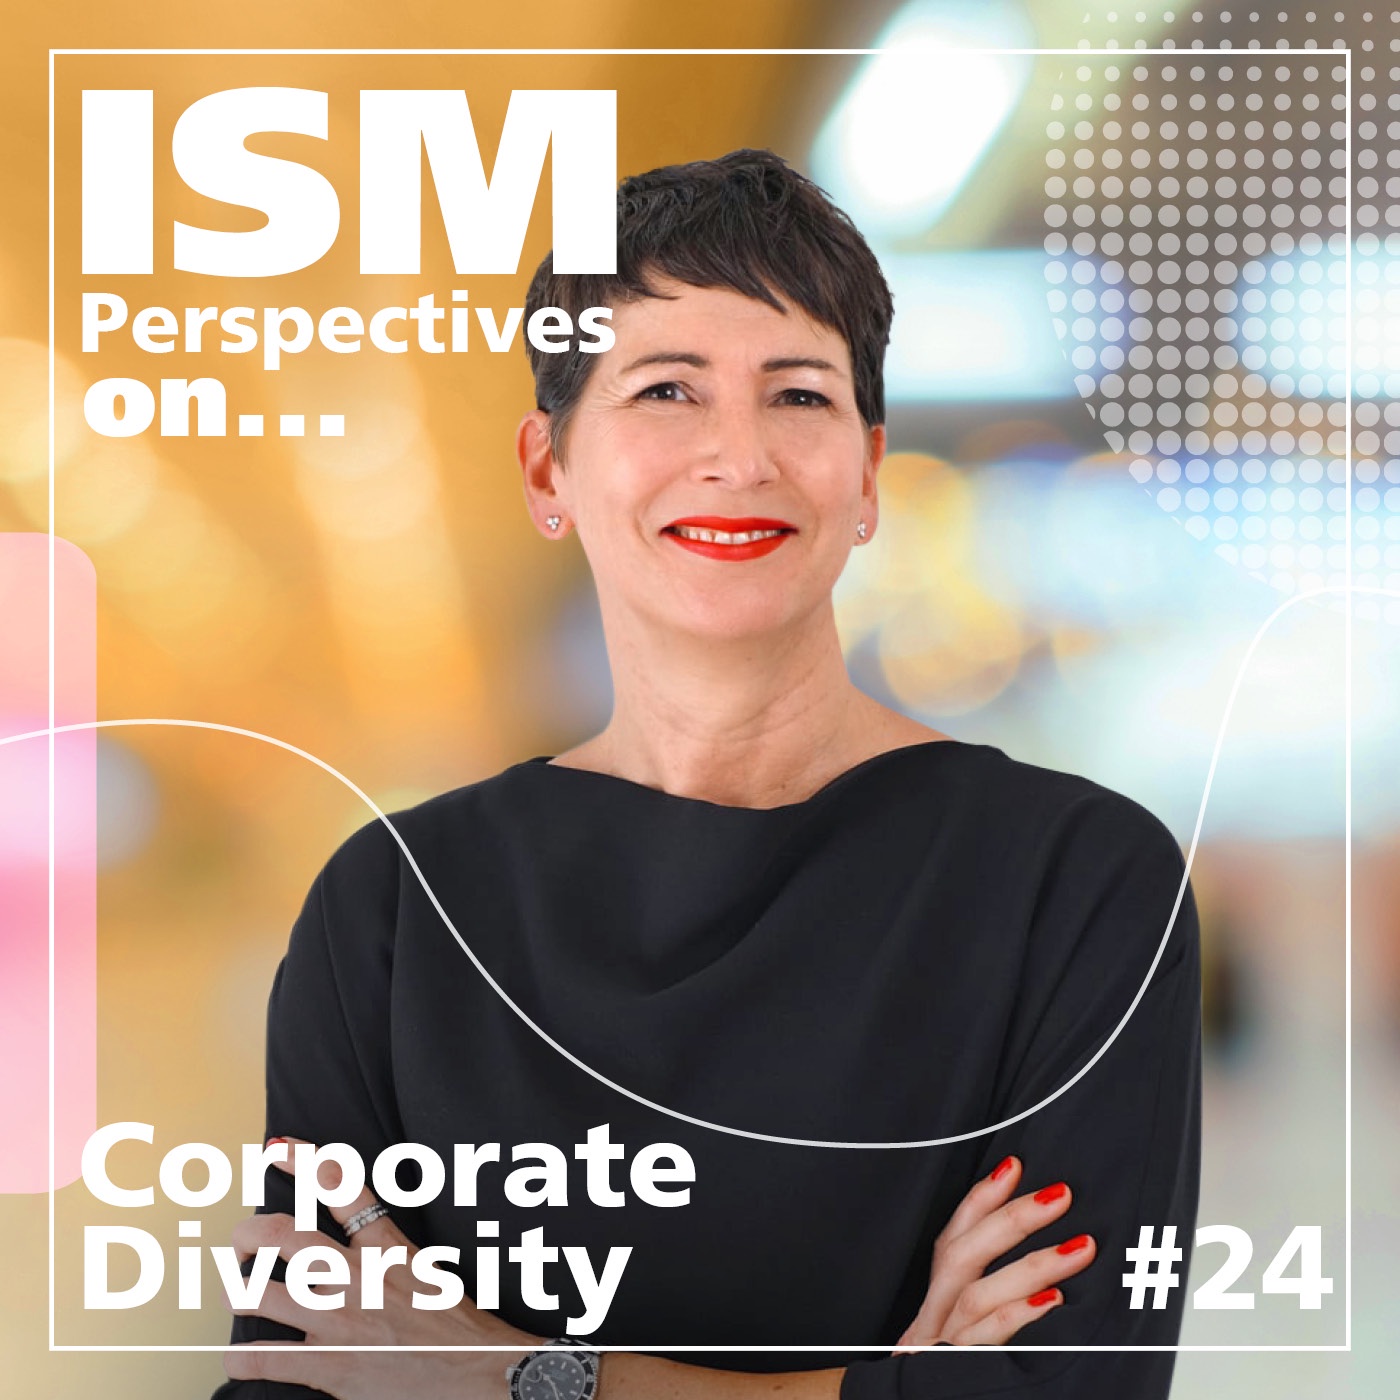 Perspectives on: Corporate Diversity